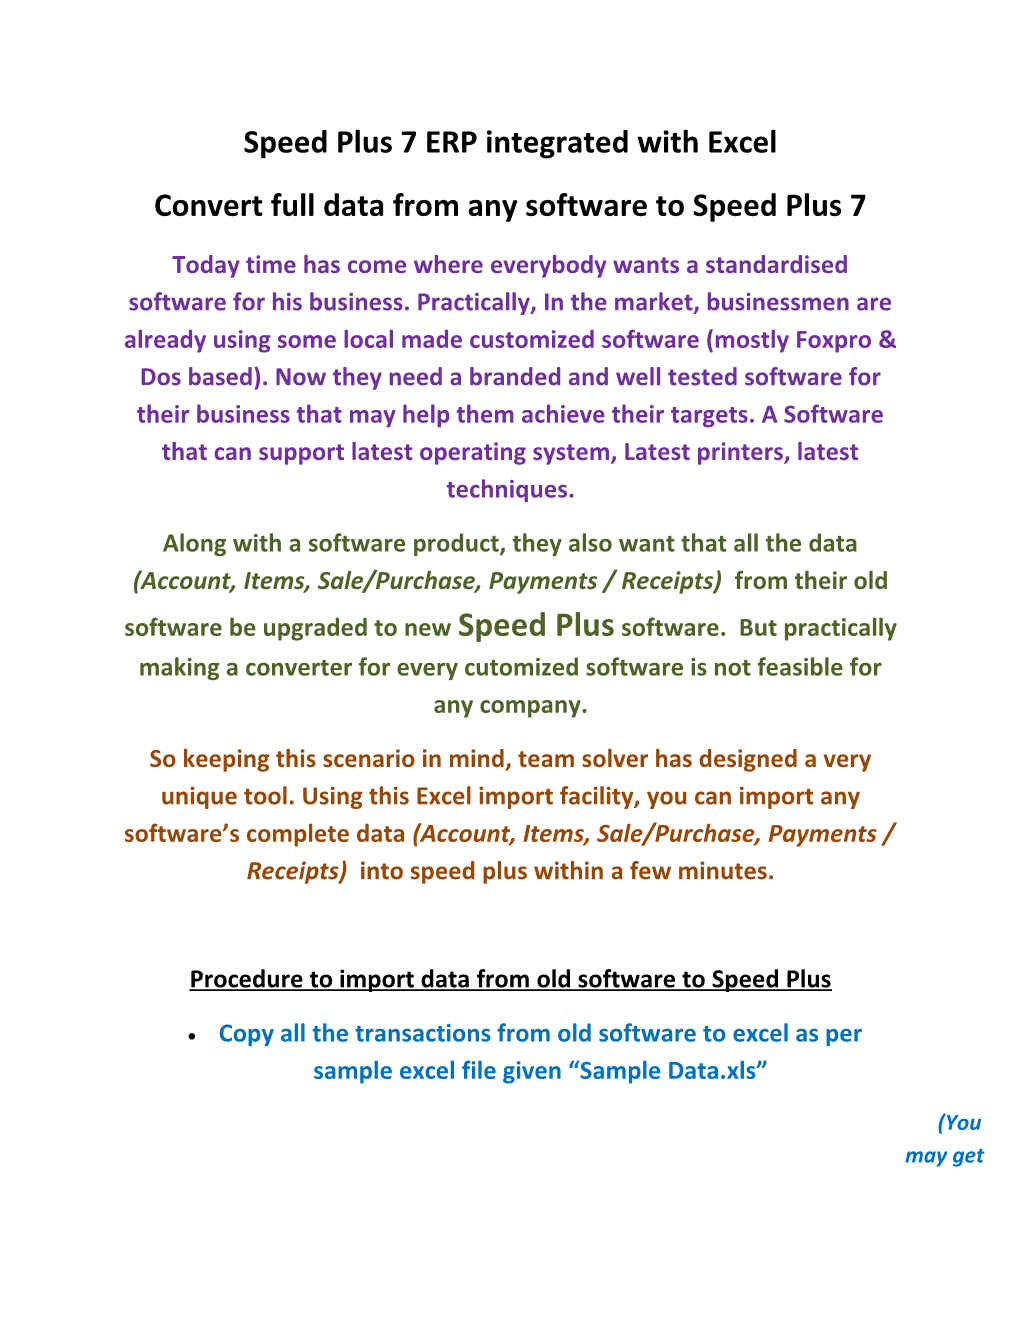 Convert Full Data from Any Software to Speed Plus 7